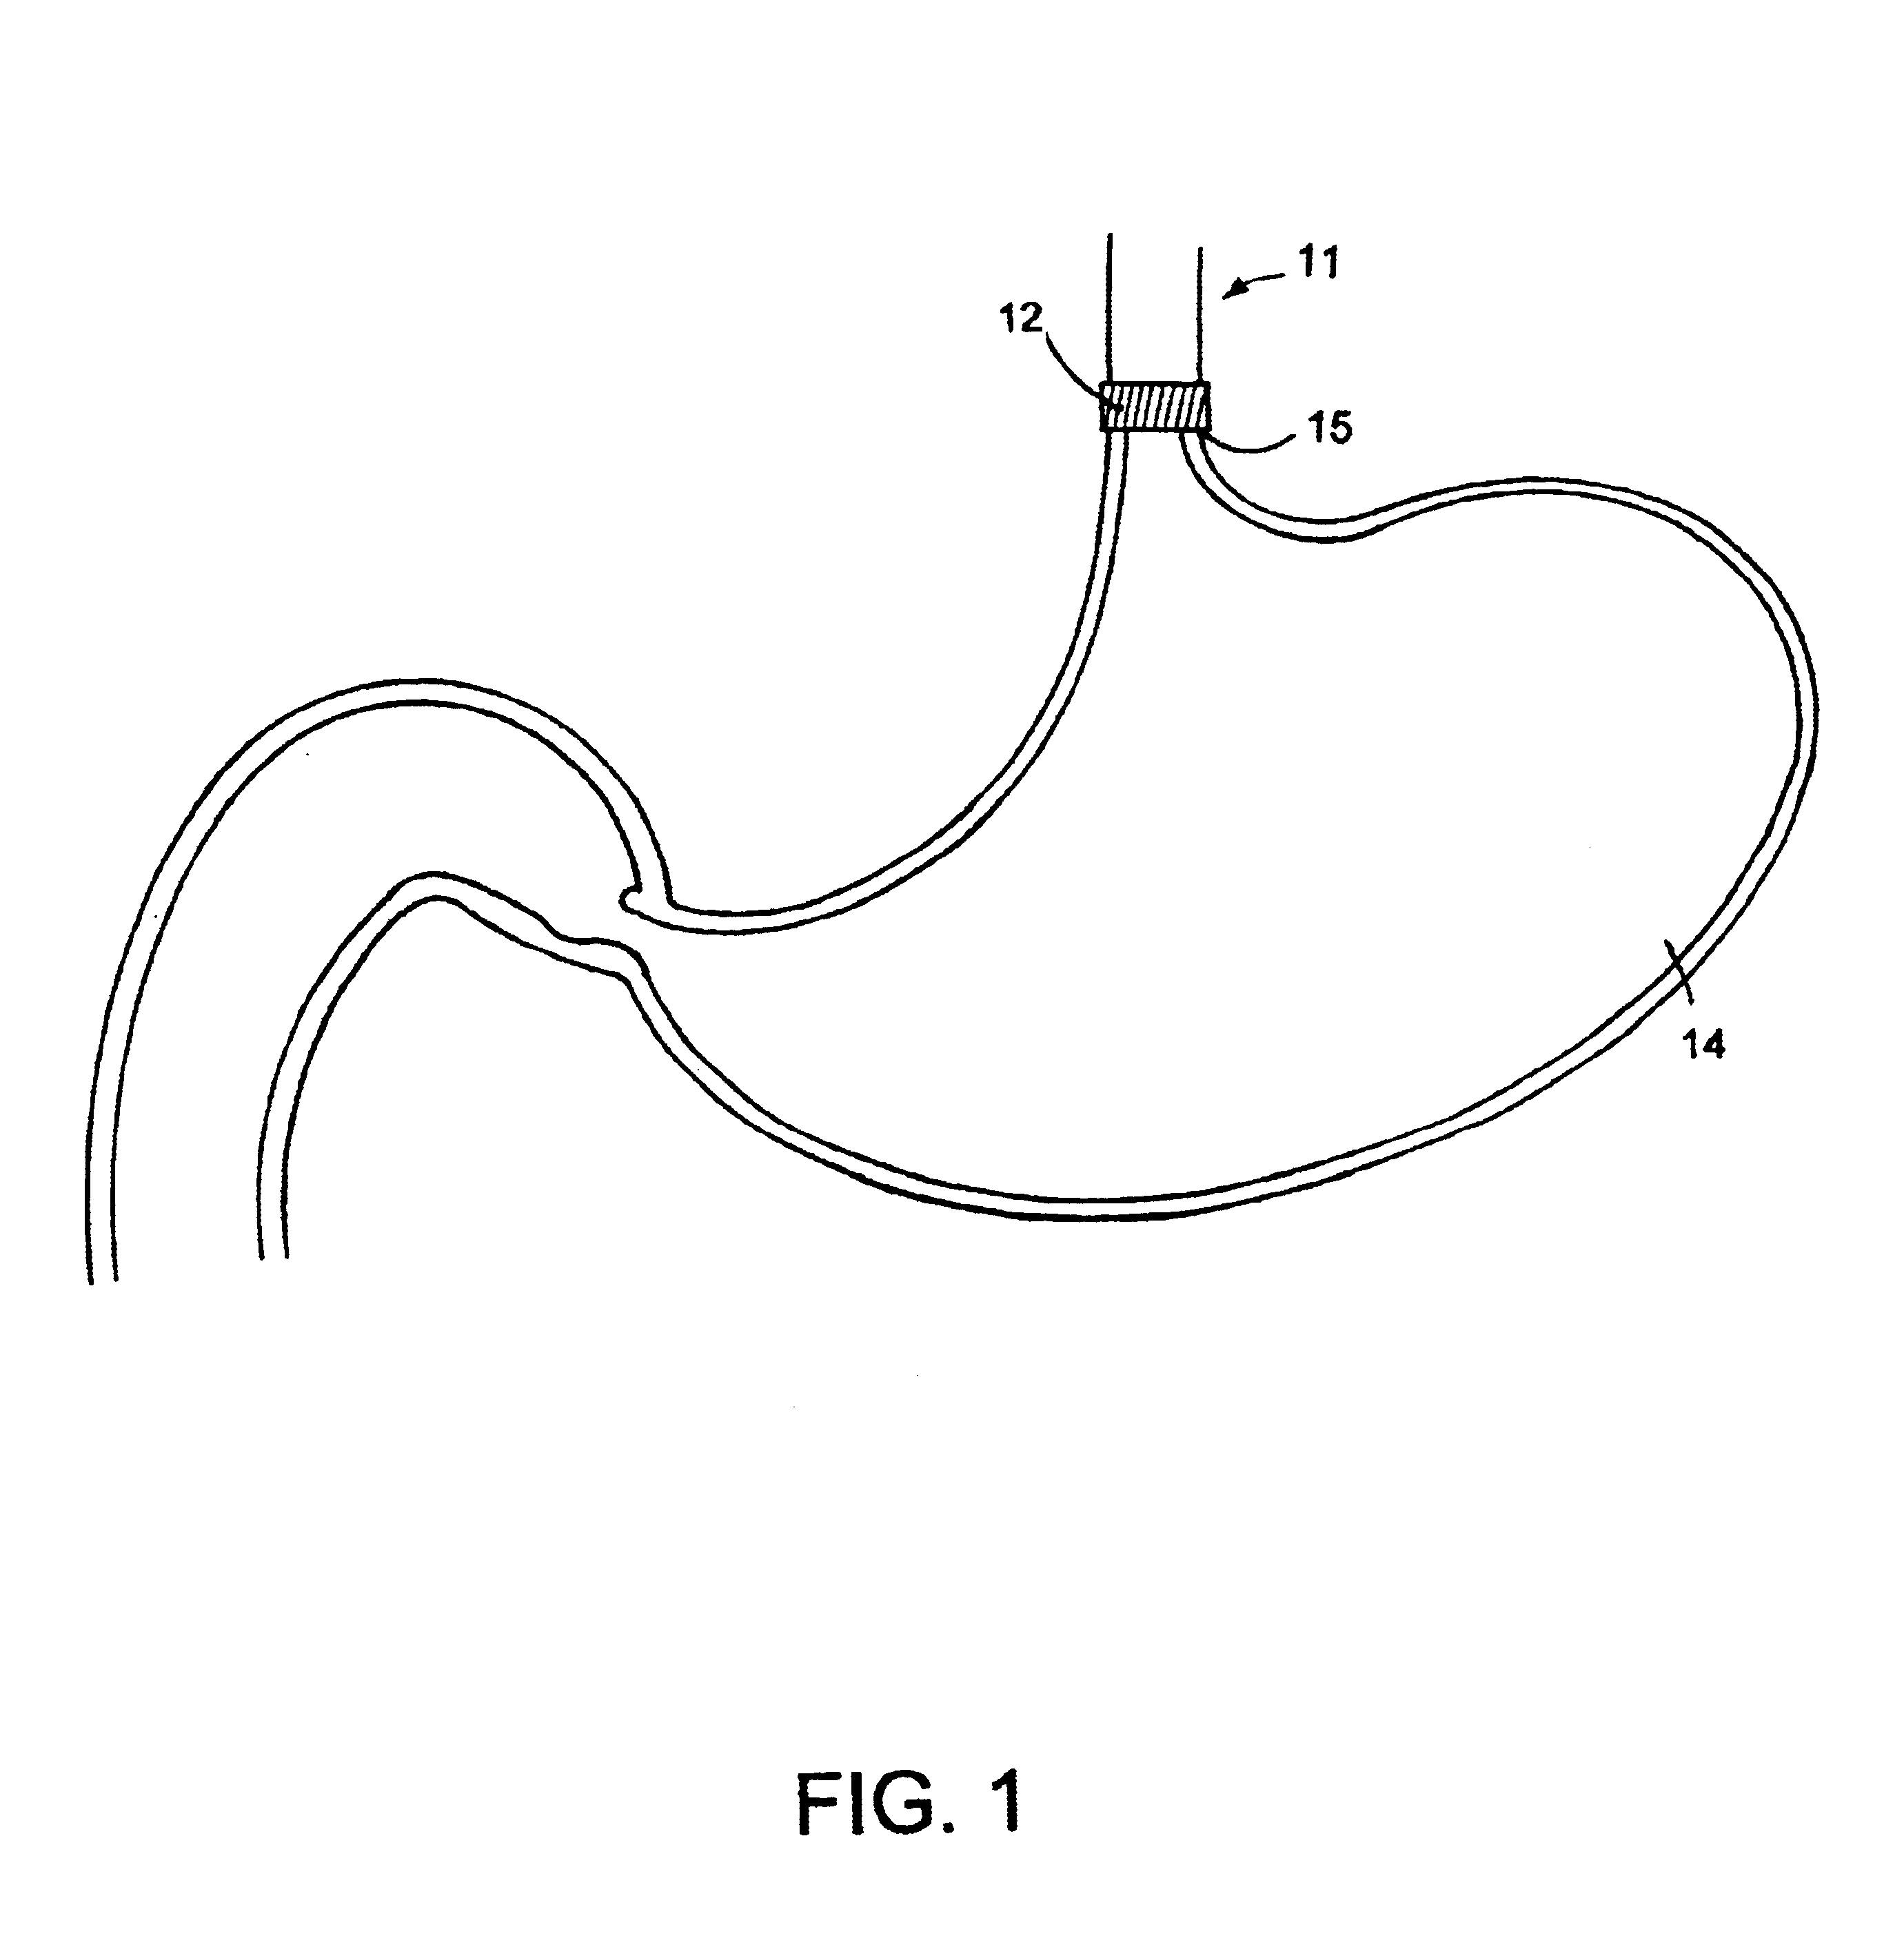 Method and apparatus for electrical stimulation of the lower esophageal sphincter